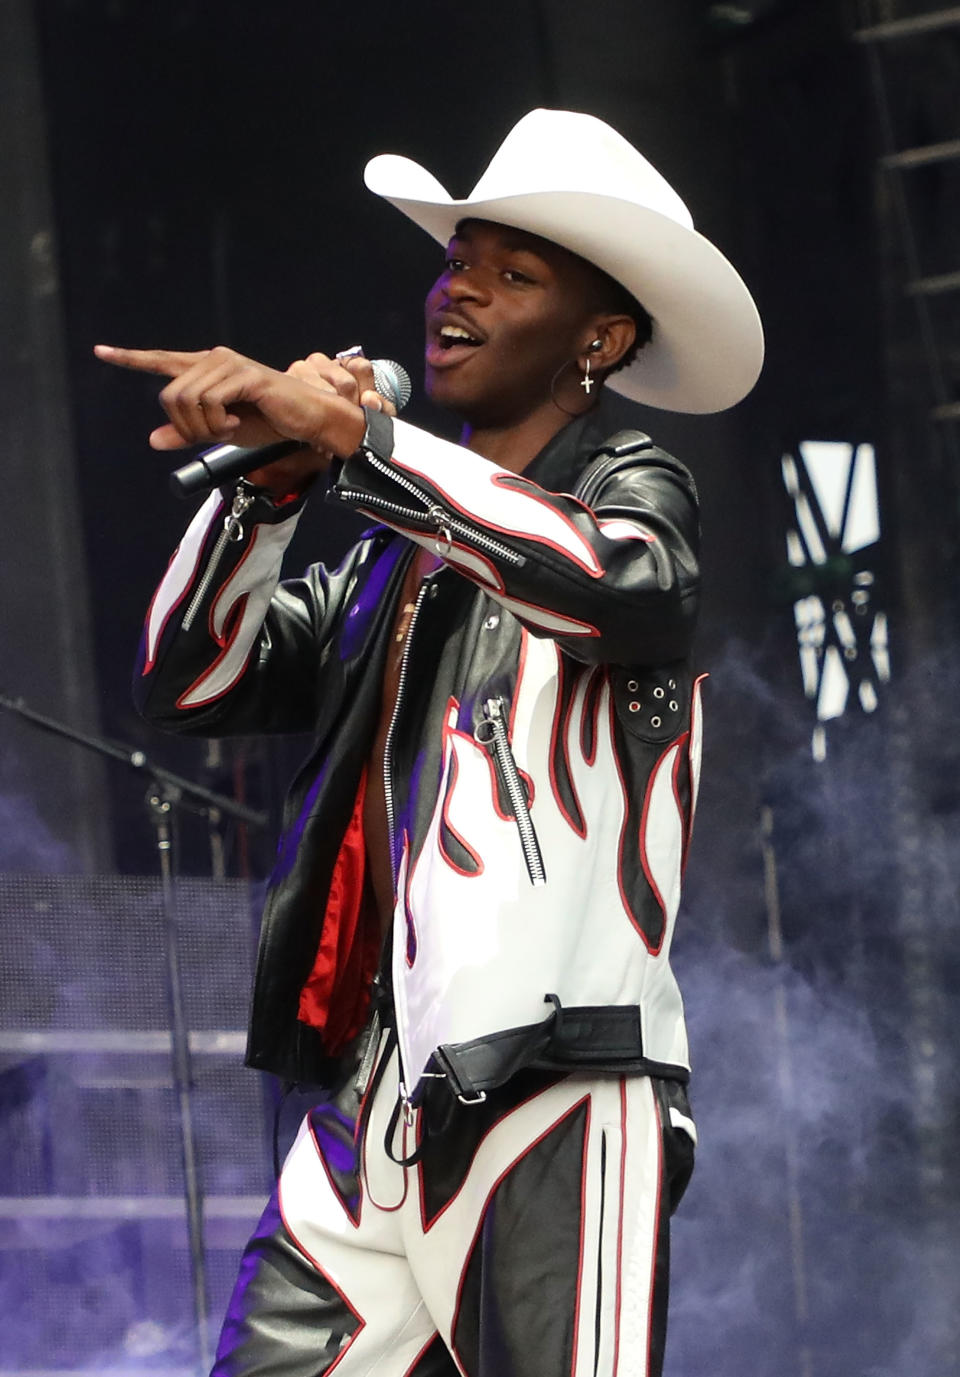 Lil Nas X performs on stage wearing a cowboy hat and a leather outfit with flame designs